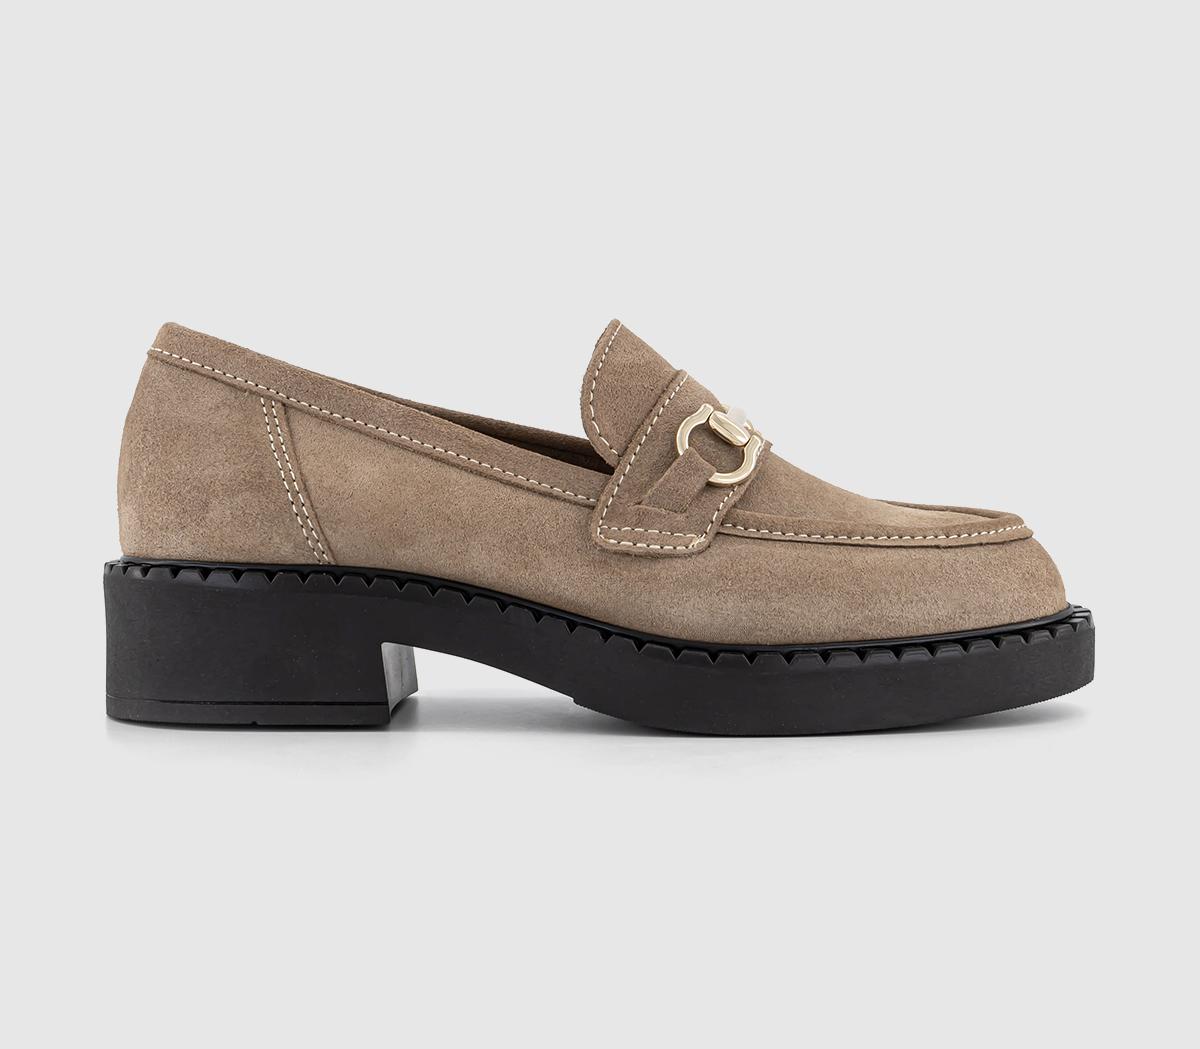 OFFICEFuture Chunky Hardware LoafersTaupe Suede